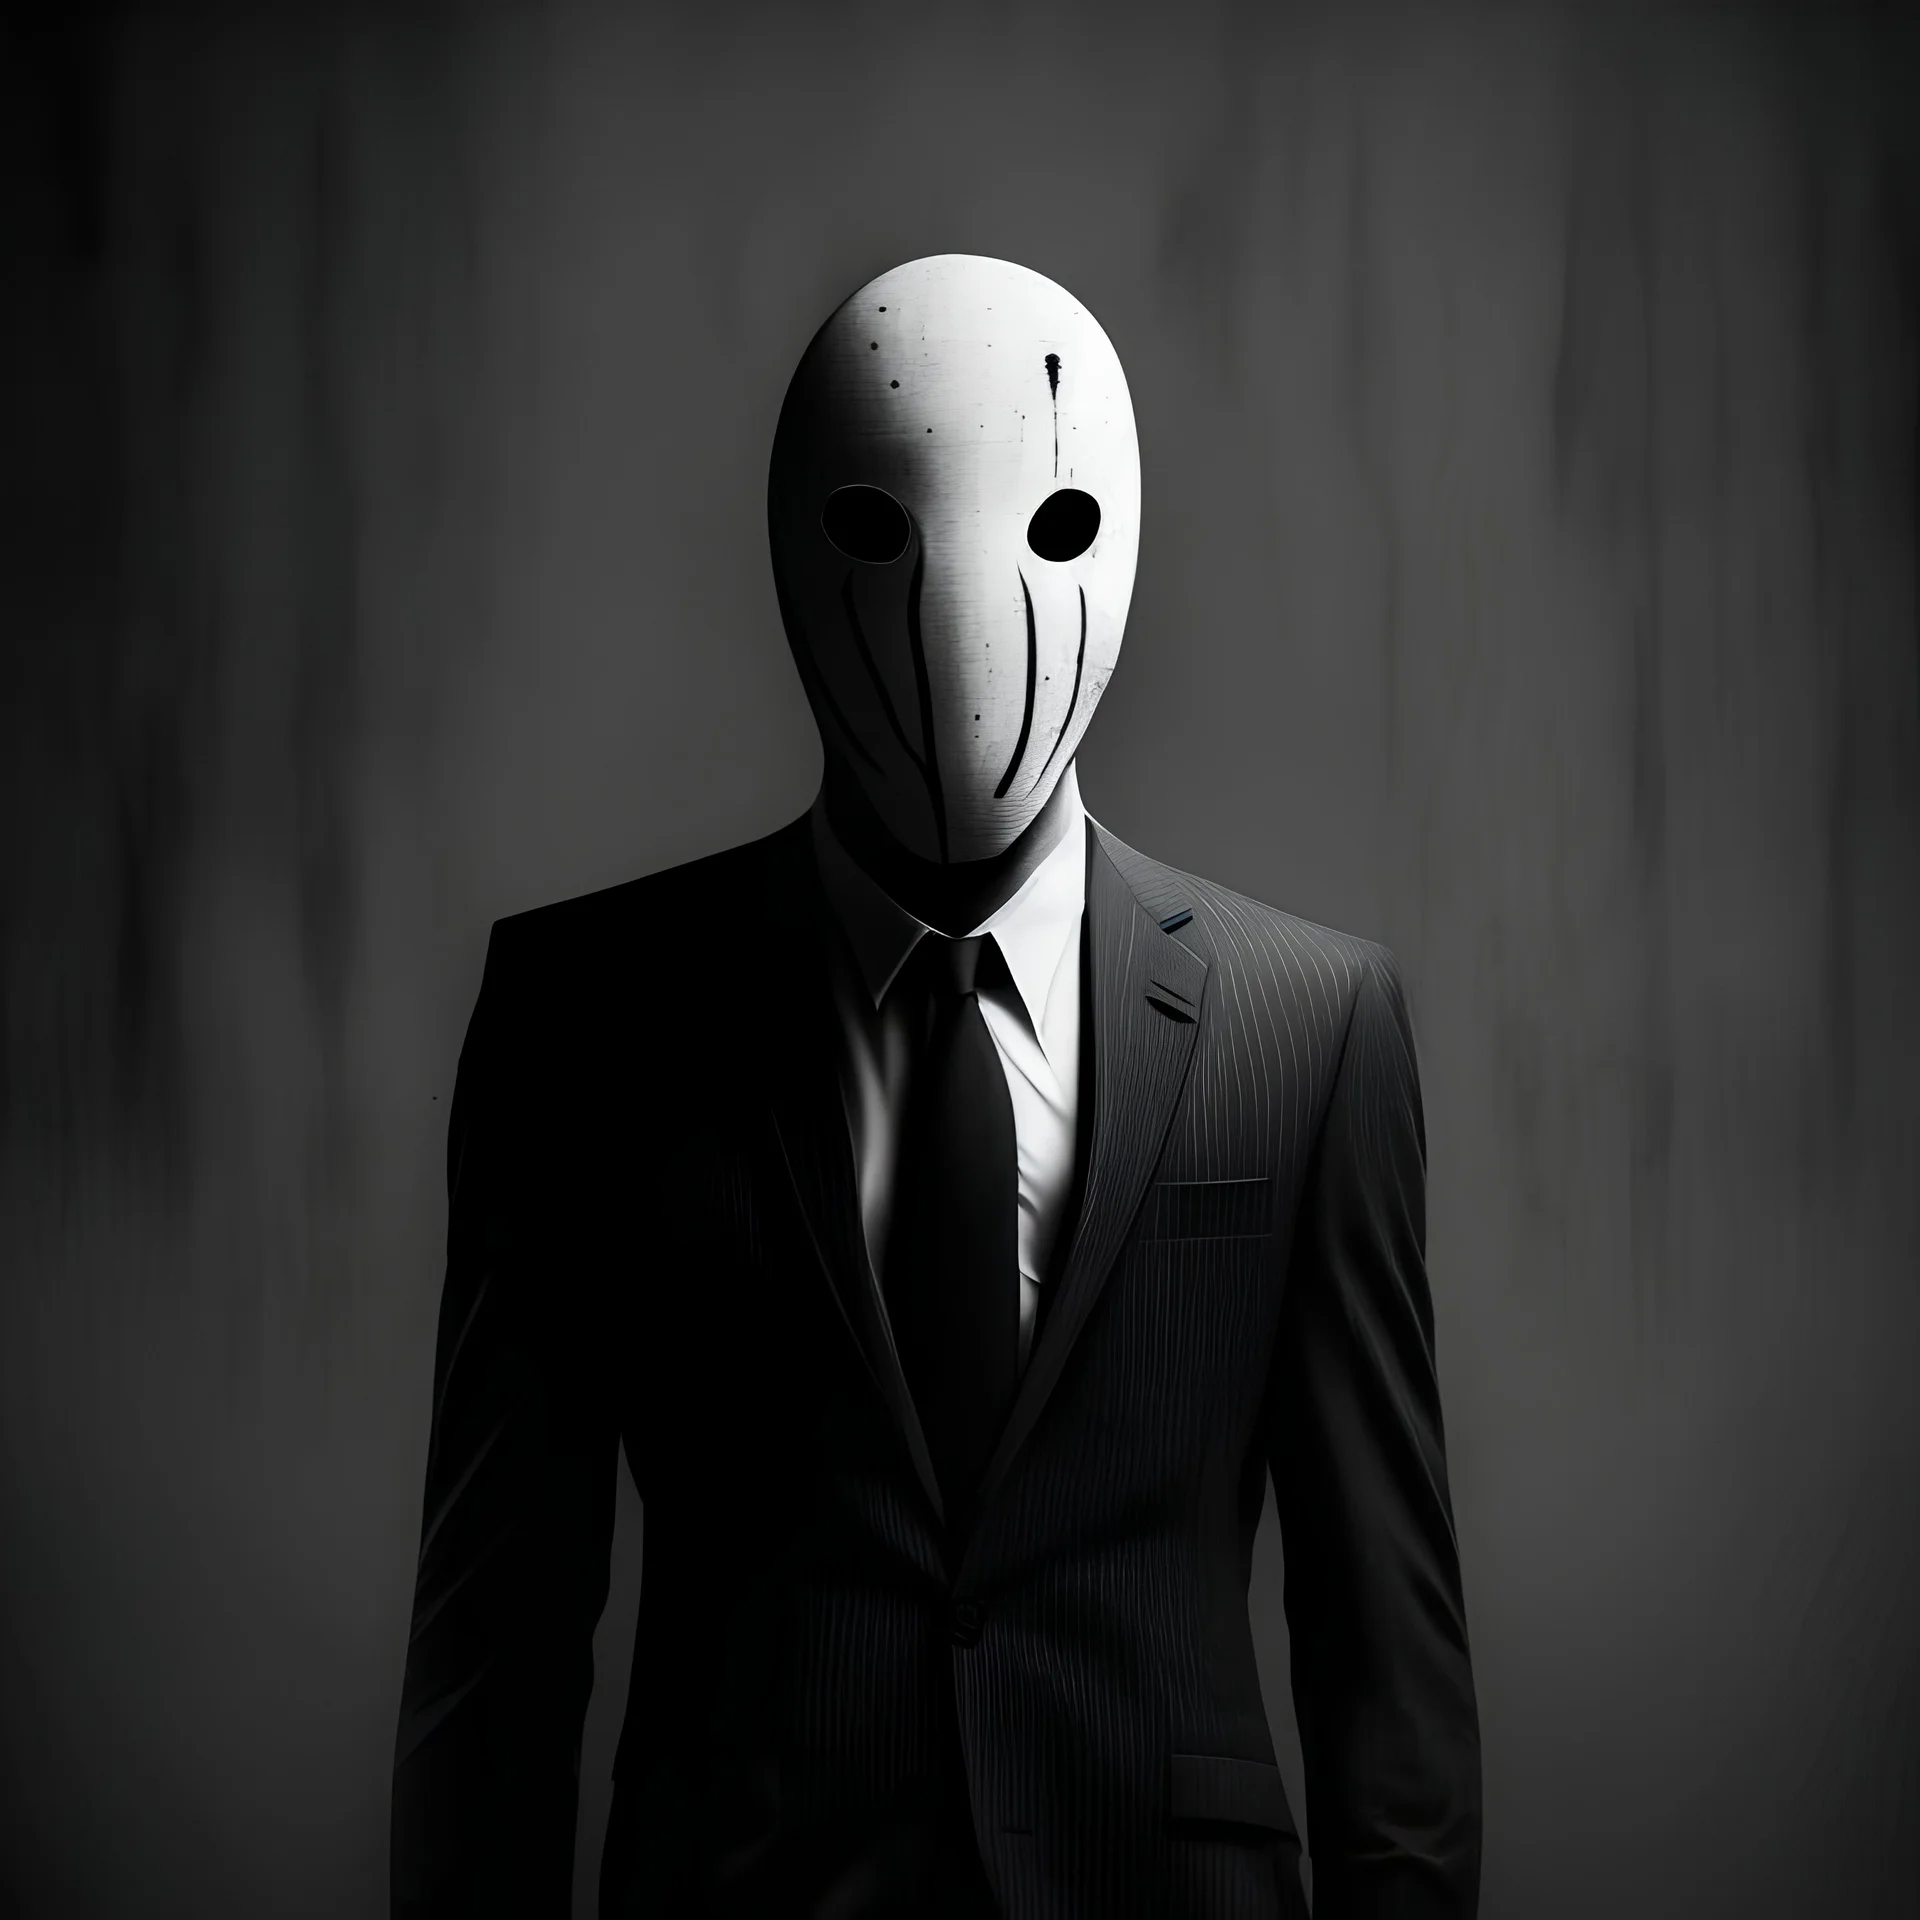 a scary figure wearing a suit and tie with no face